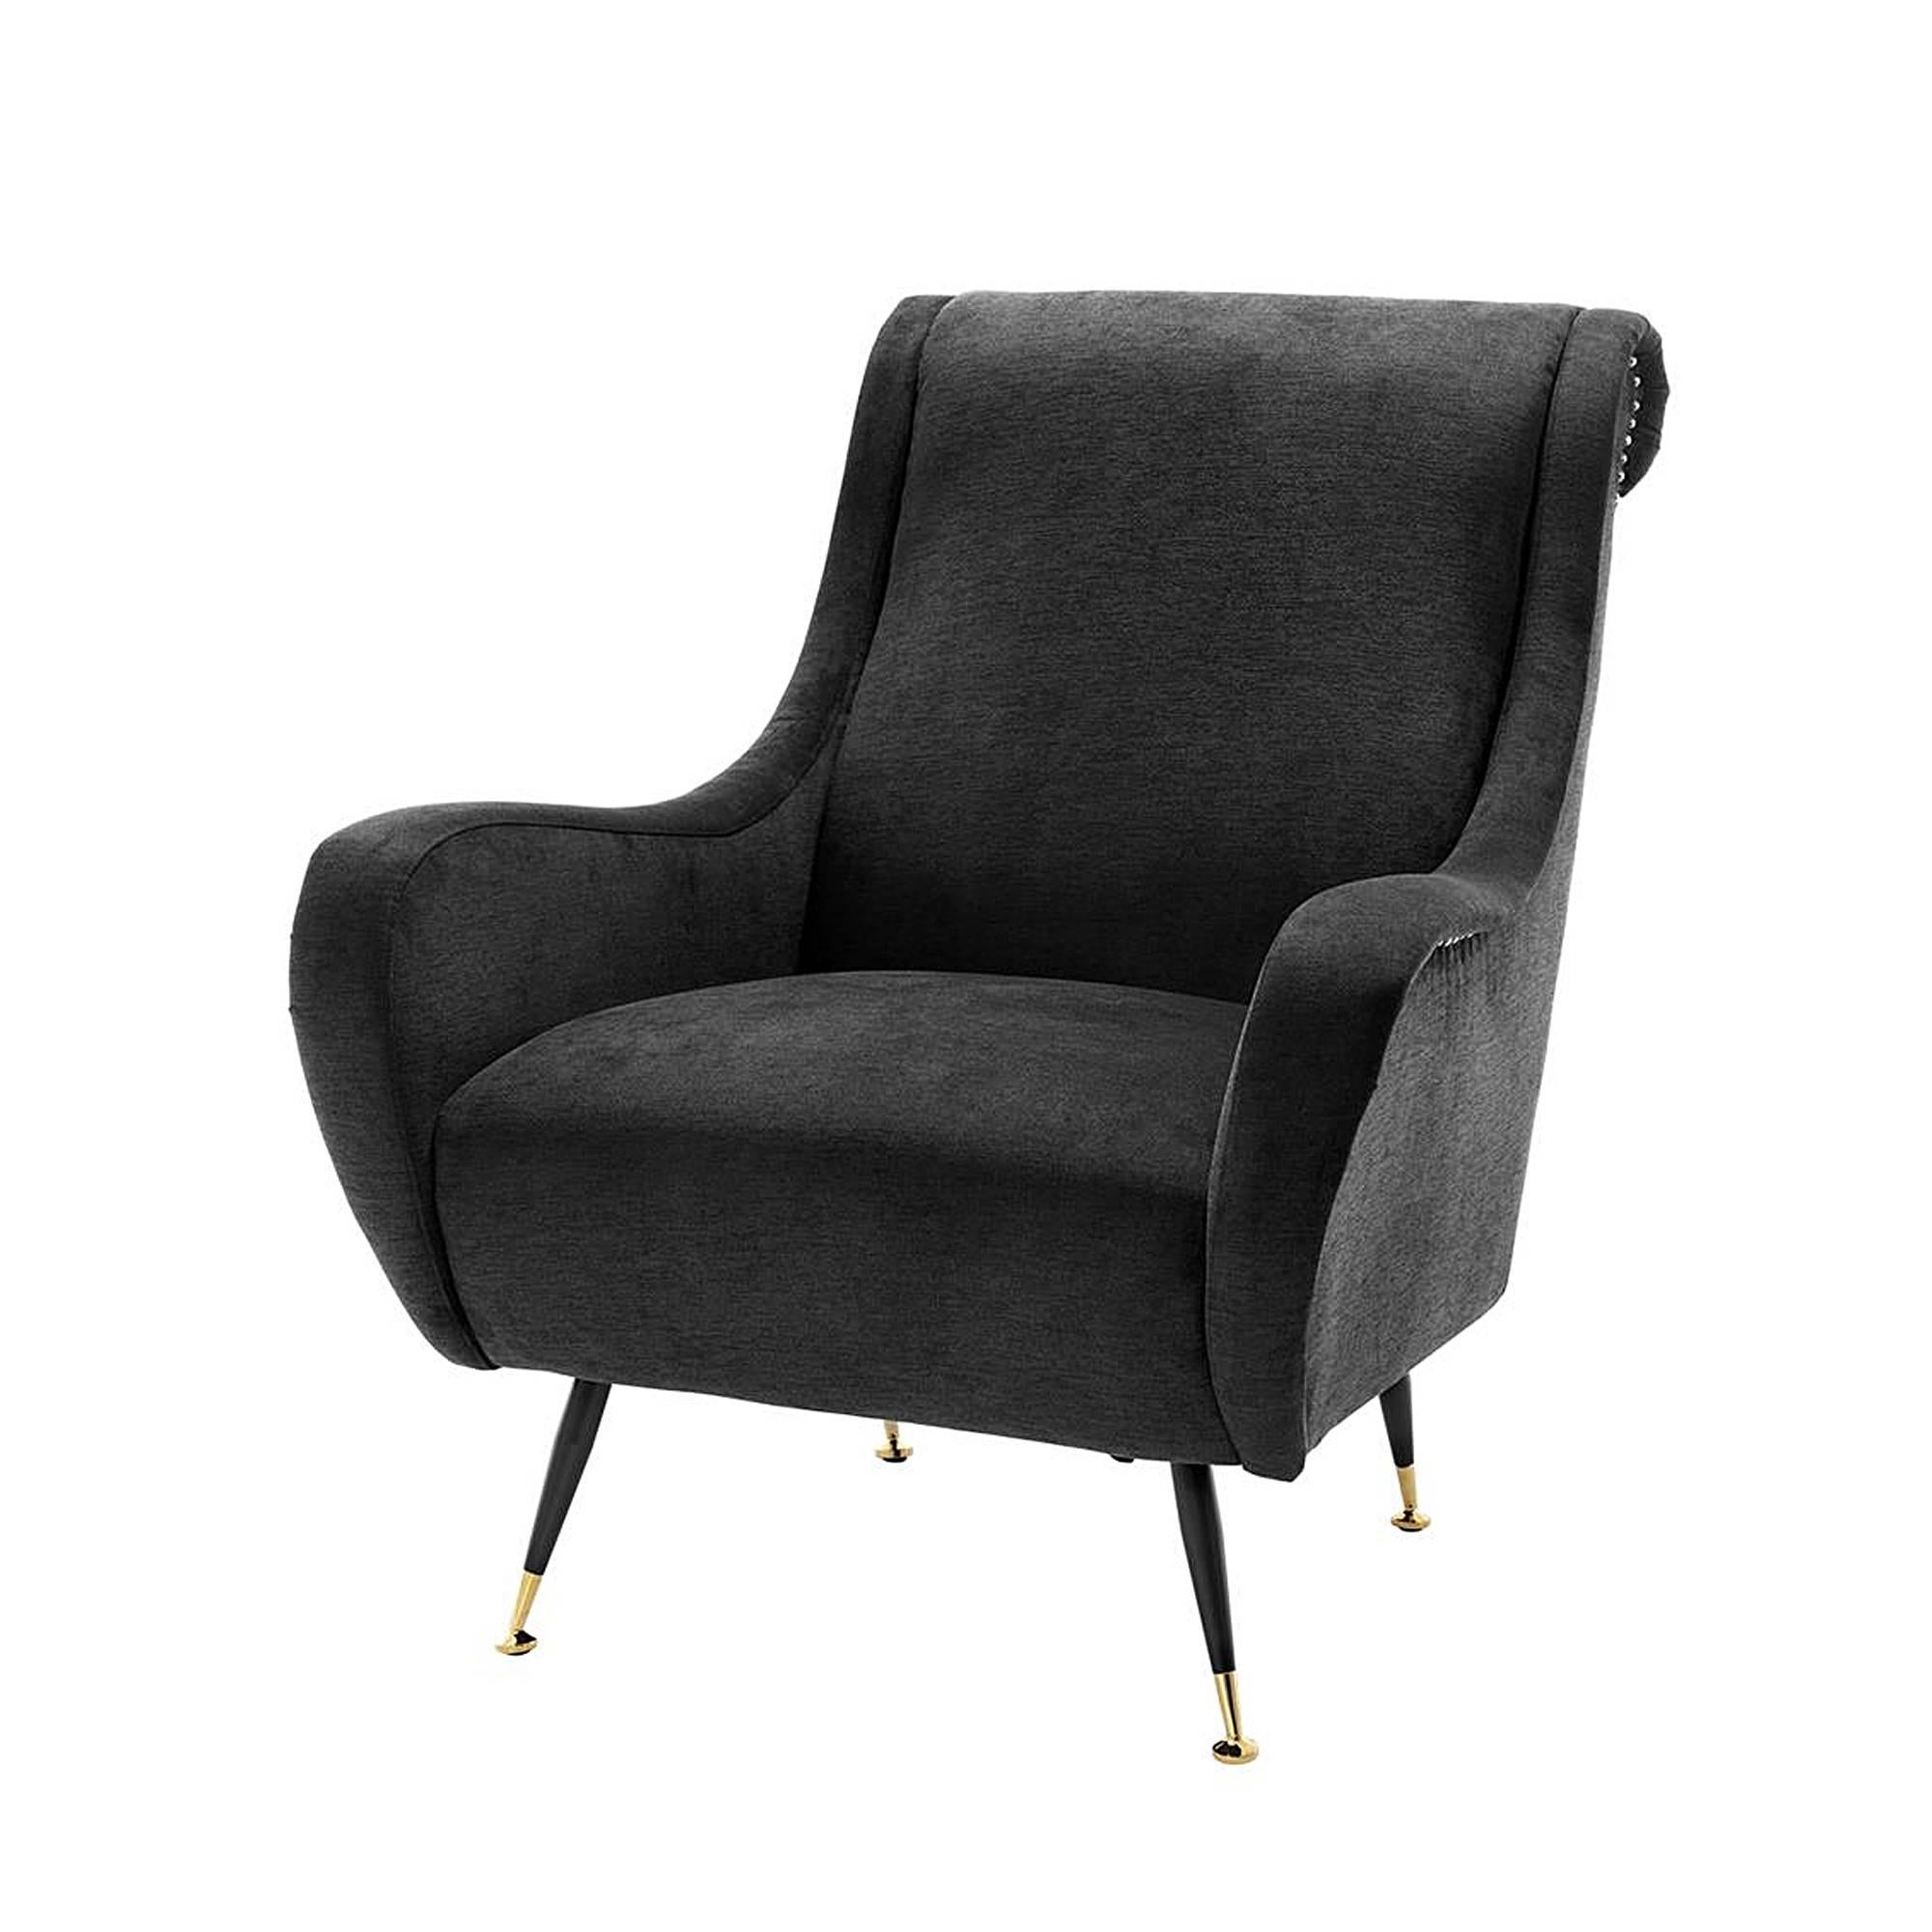 Chinese Santiago Armchair in Velvet Deep Turquoise with Brass Legs